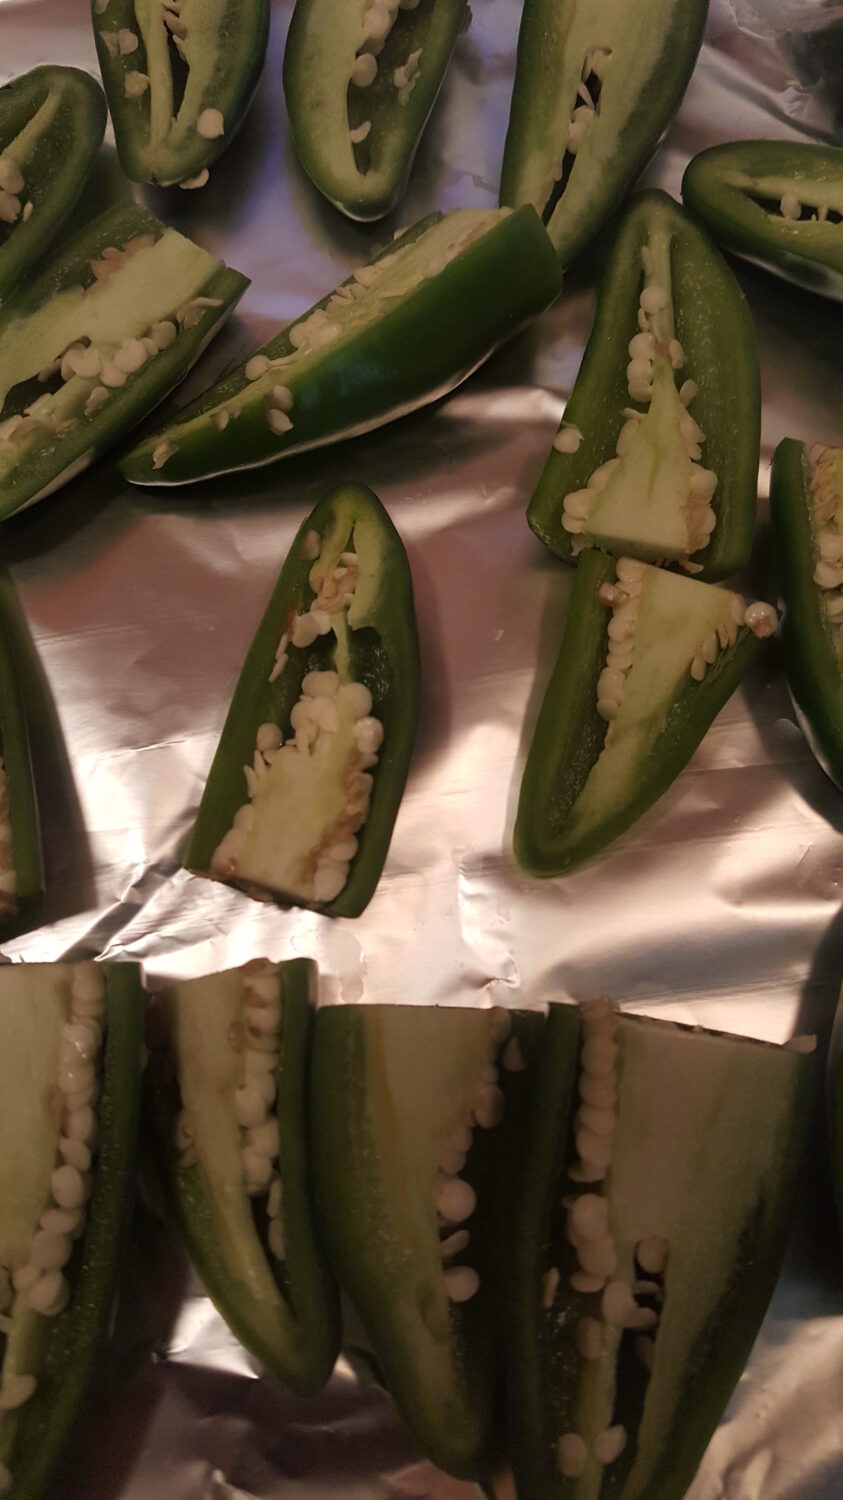 leave seeds in jalapenos when drying